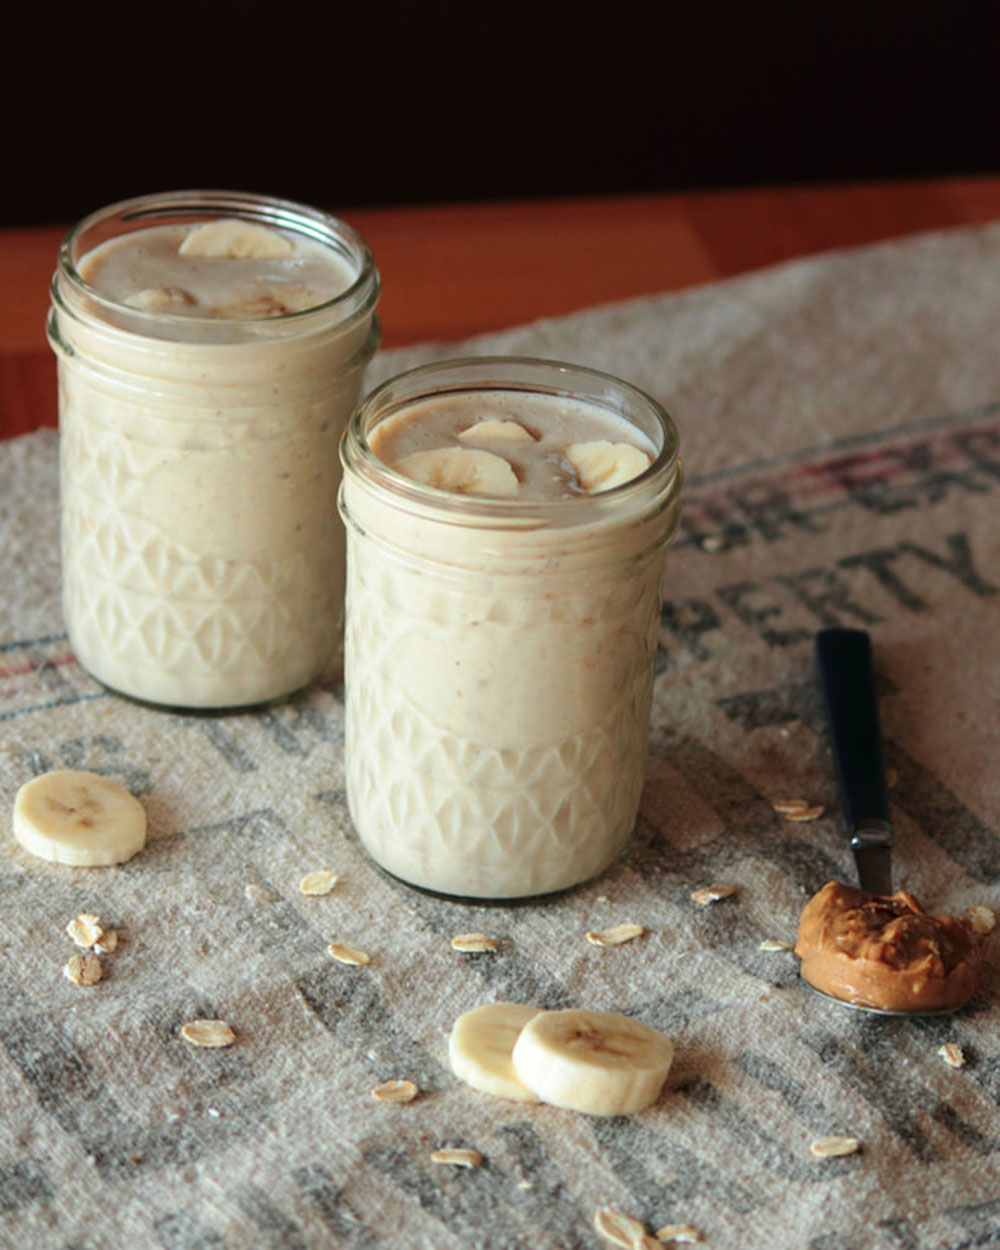 Banana peanut butter protein smoothie from Pastry Affair